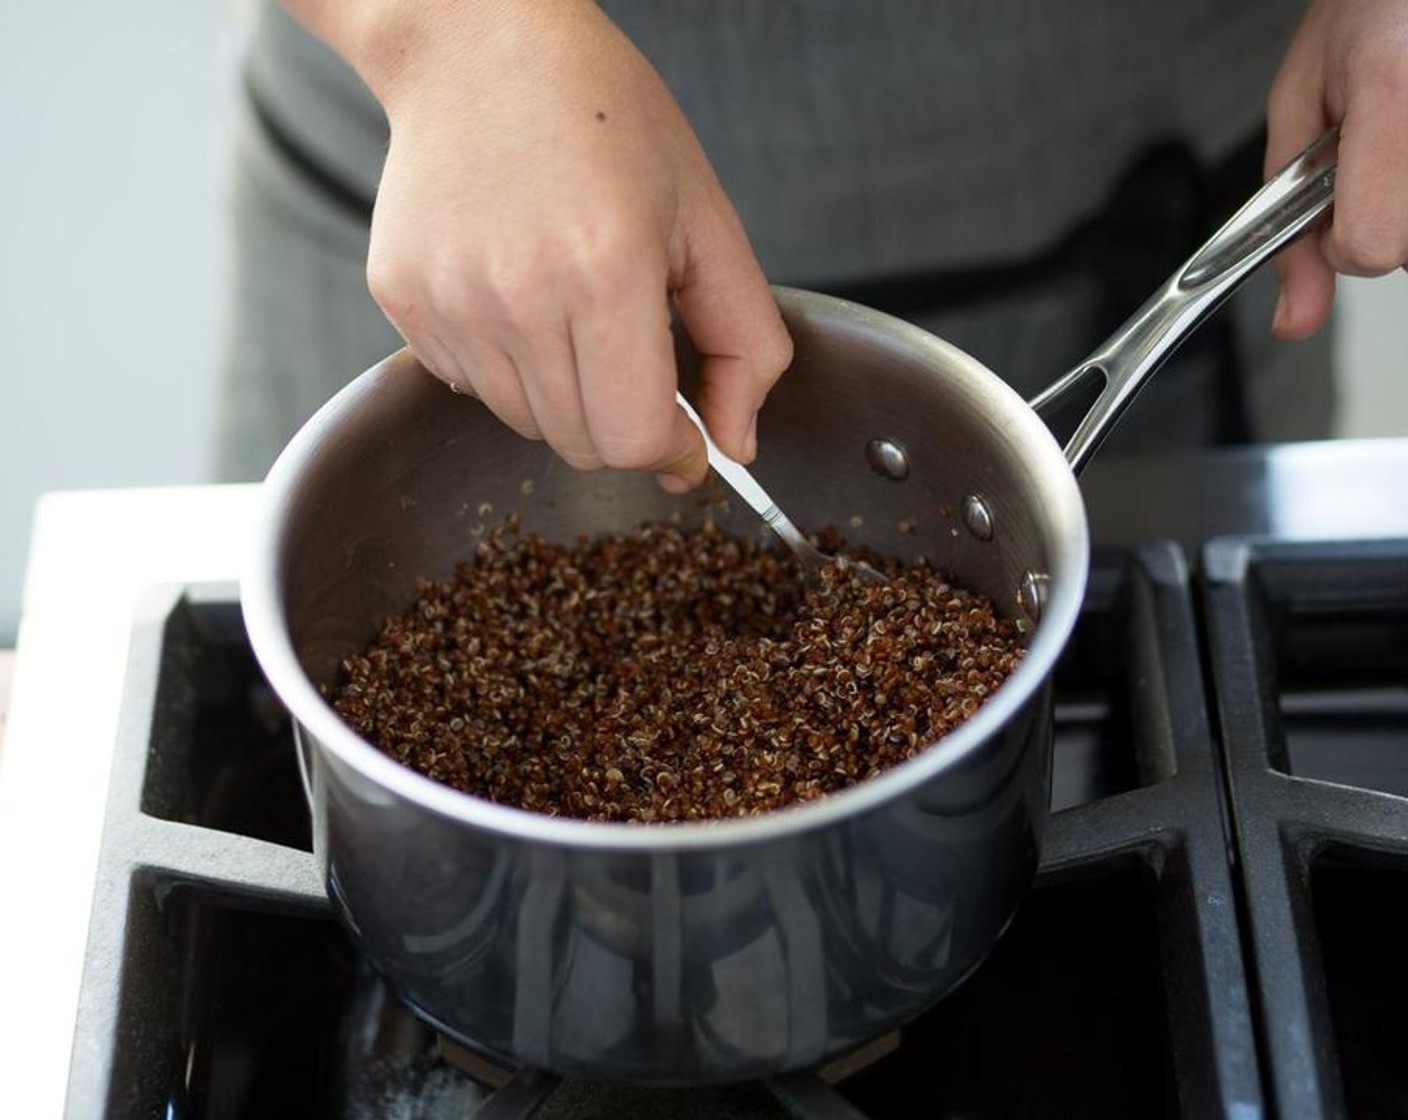 step 3 In a small saucepot over medium-high heat, bring Water (1 1/2 cups) to a boil. Add the Red Quinoa (2/3 cup), McCormick® Garlic Powder (1 tsp), Salt (1/4 tsp) and only HALF of the lime juice and HALF of the Chili Powder (1/4 tsp). Stir to combine.